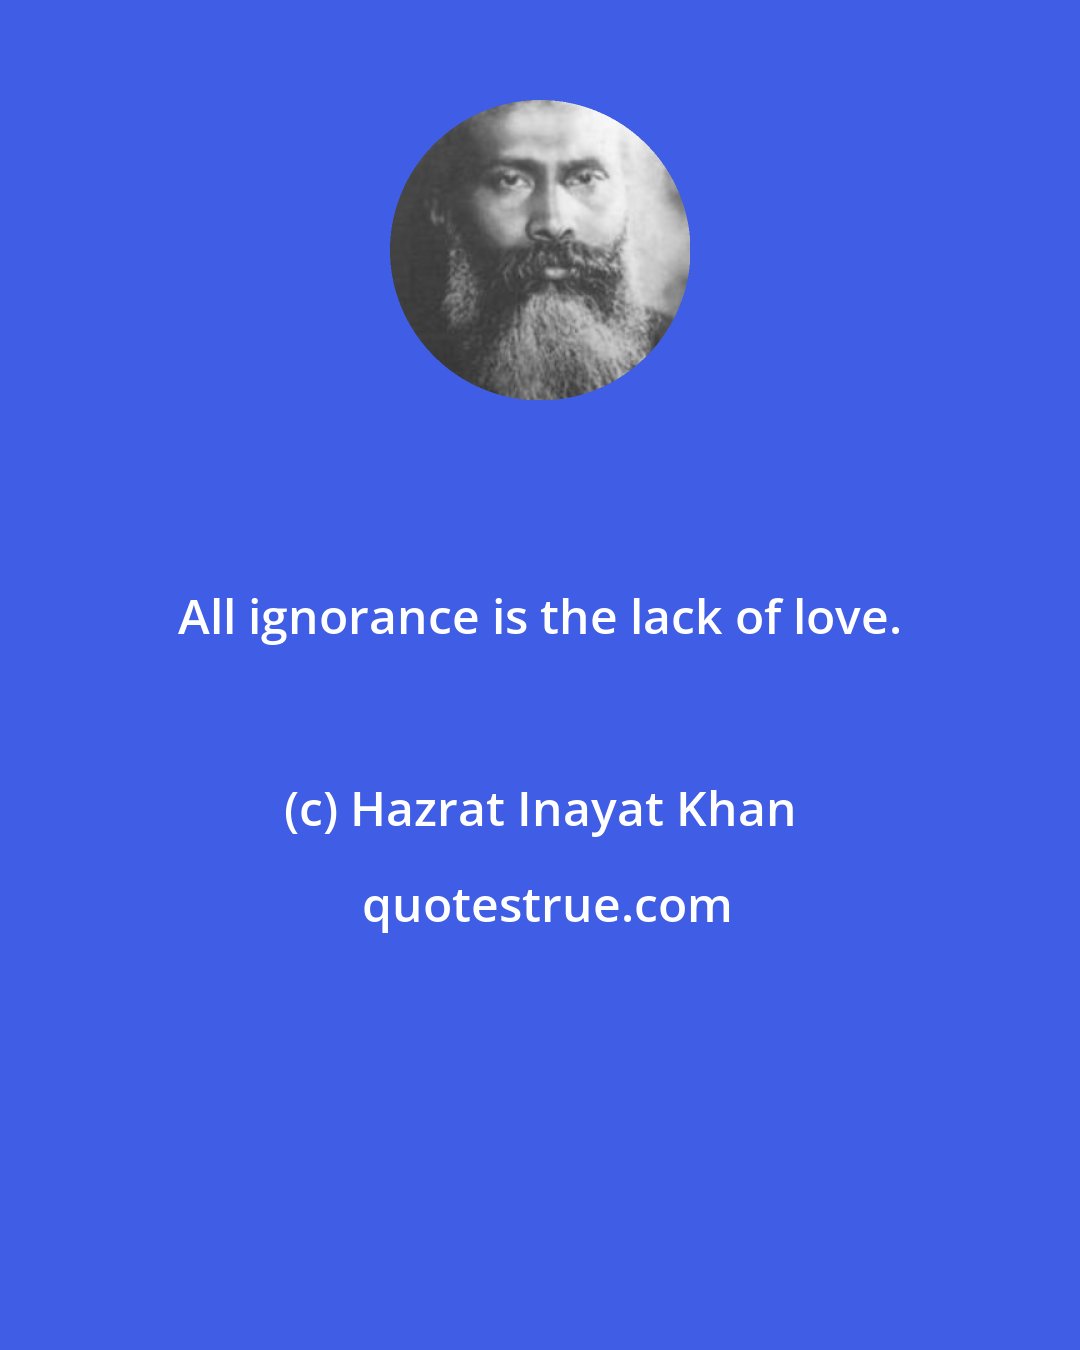 Hazrat Inayat Khan: All ignorance is the lack of love.